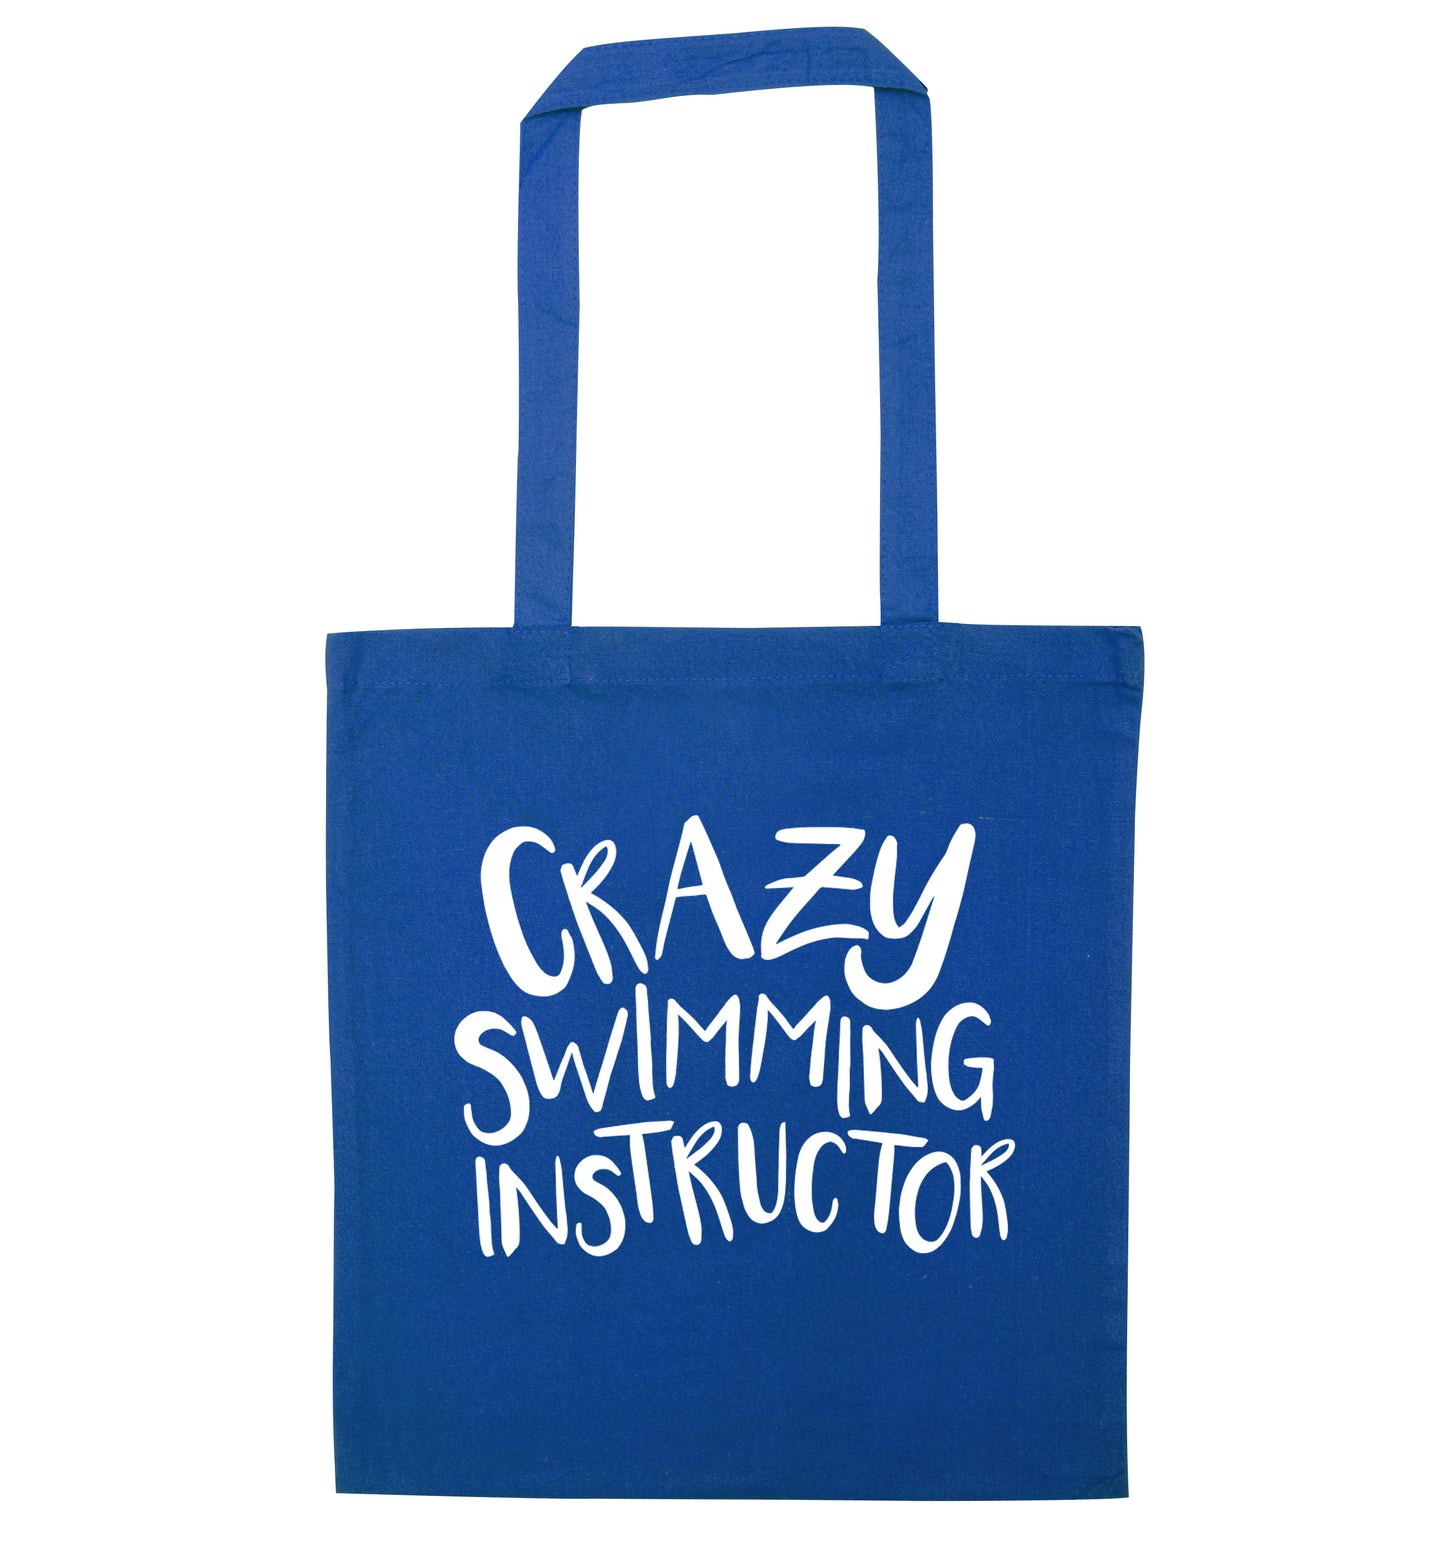 Crazy swimming instructor blue tote bag